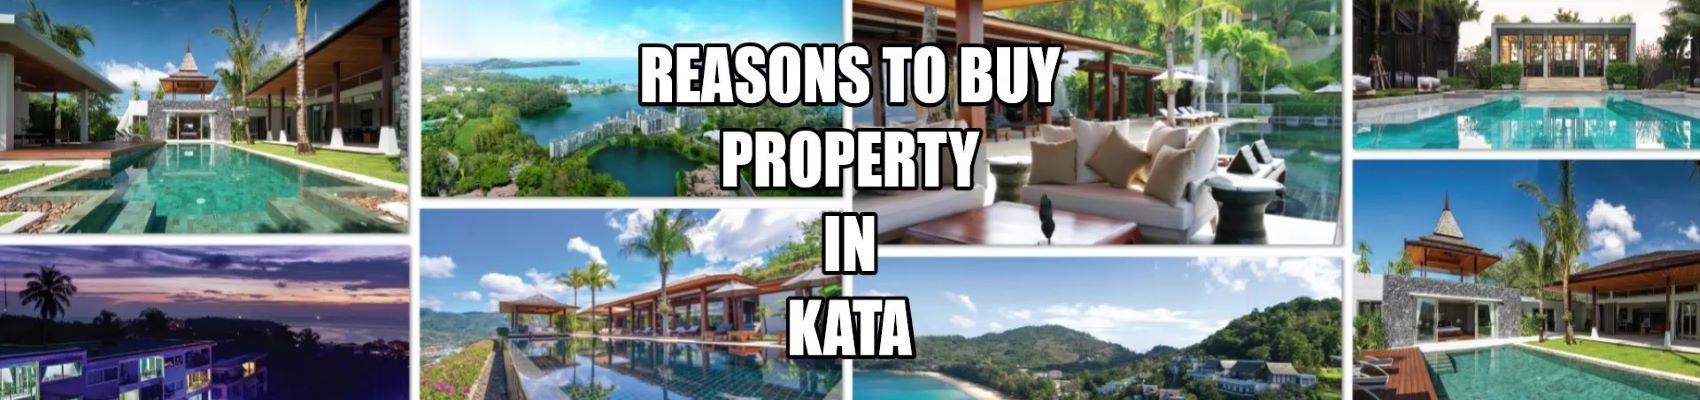 Tips to Buying Property in Kata